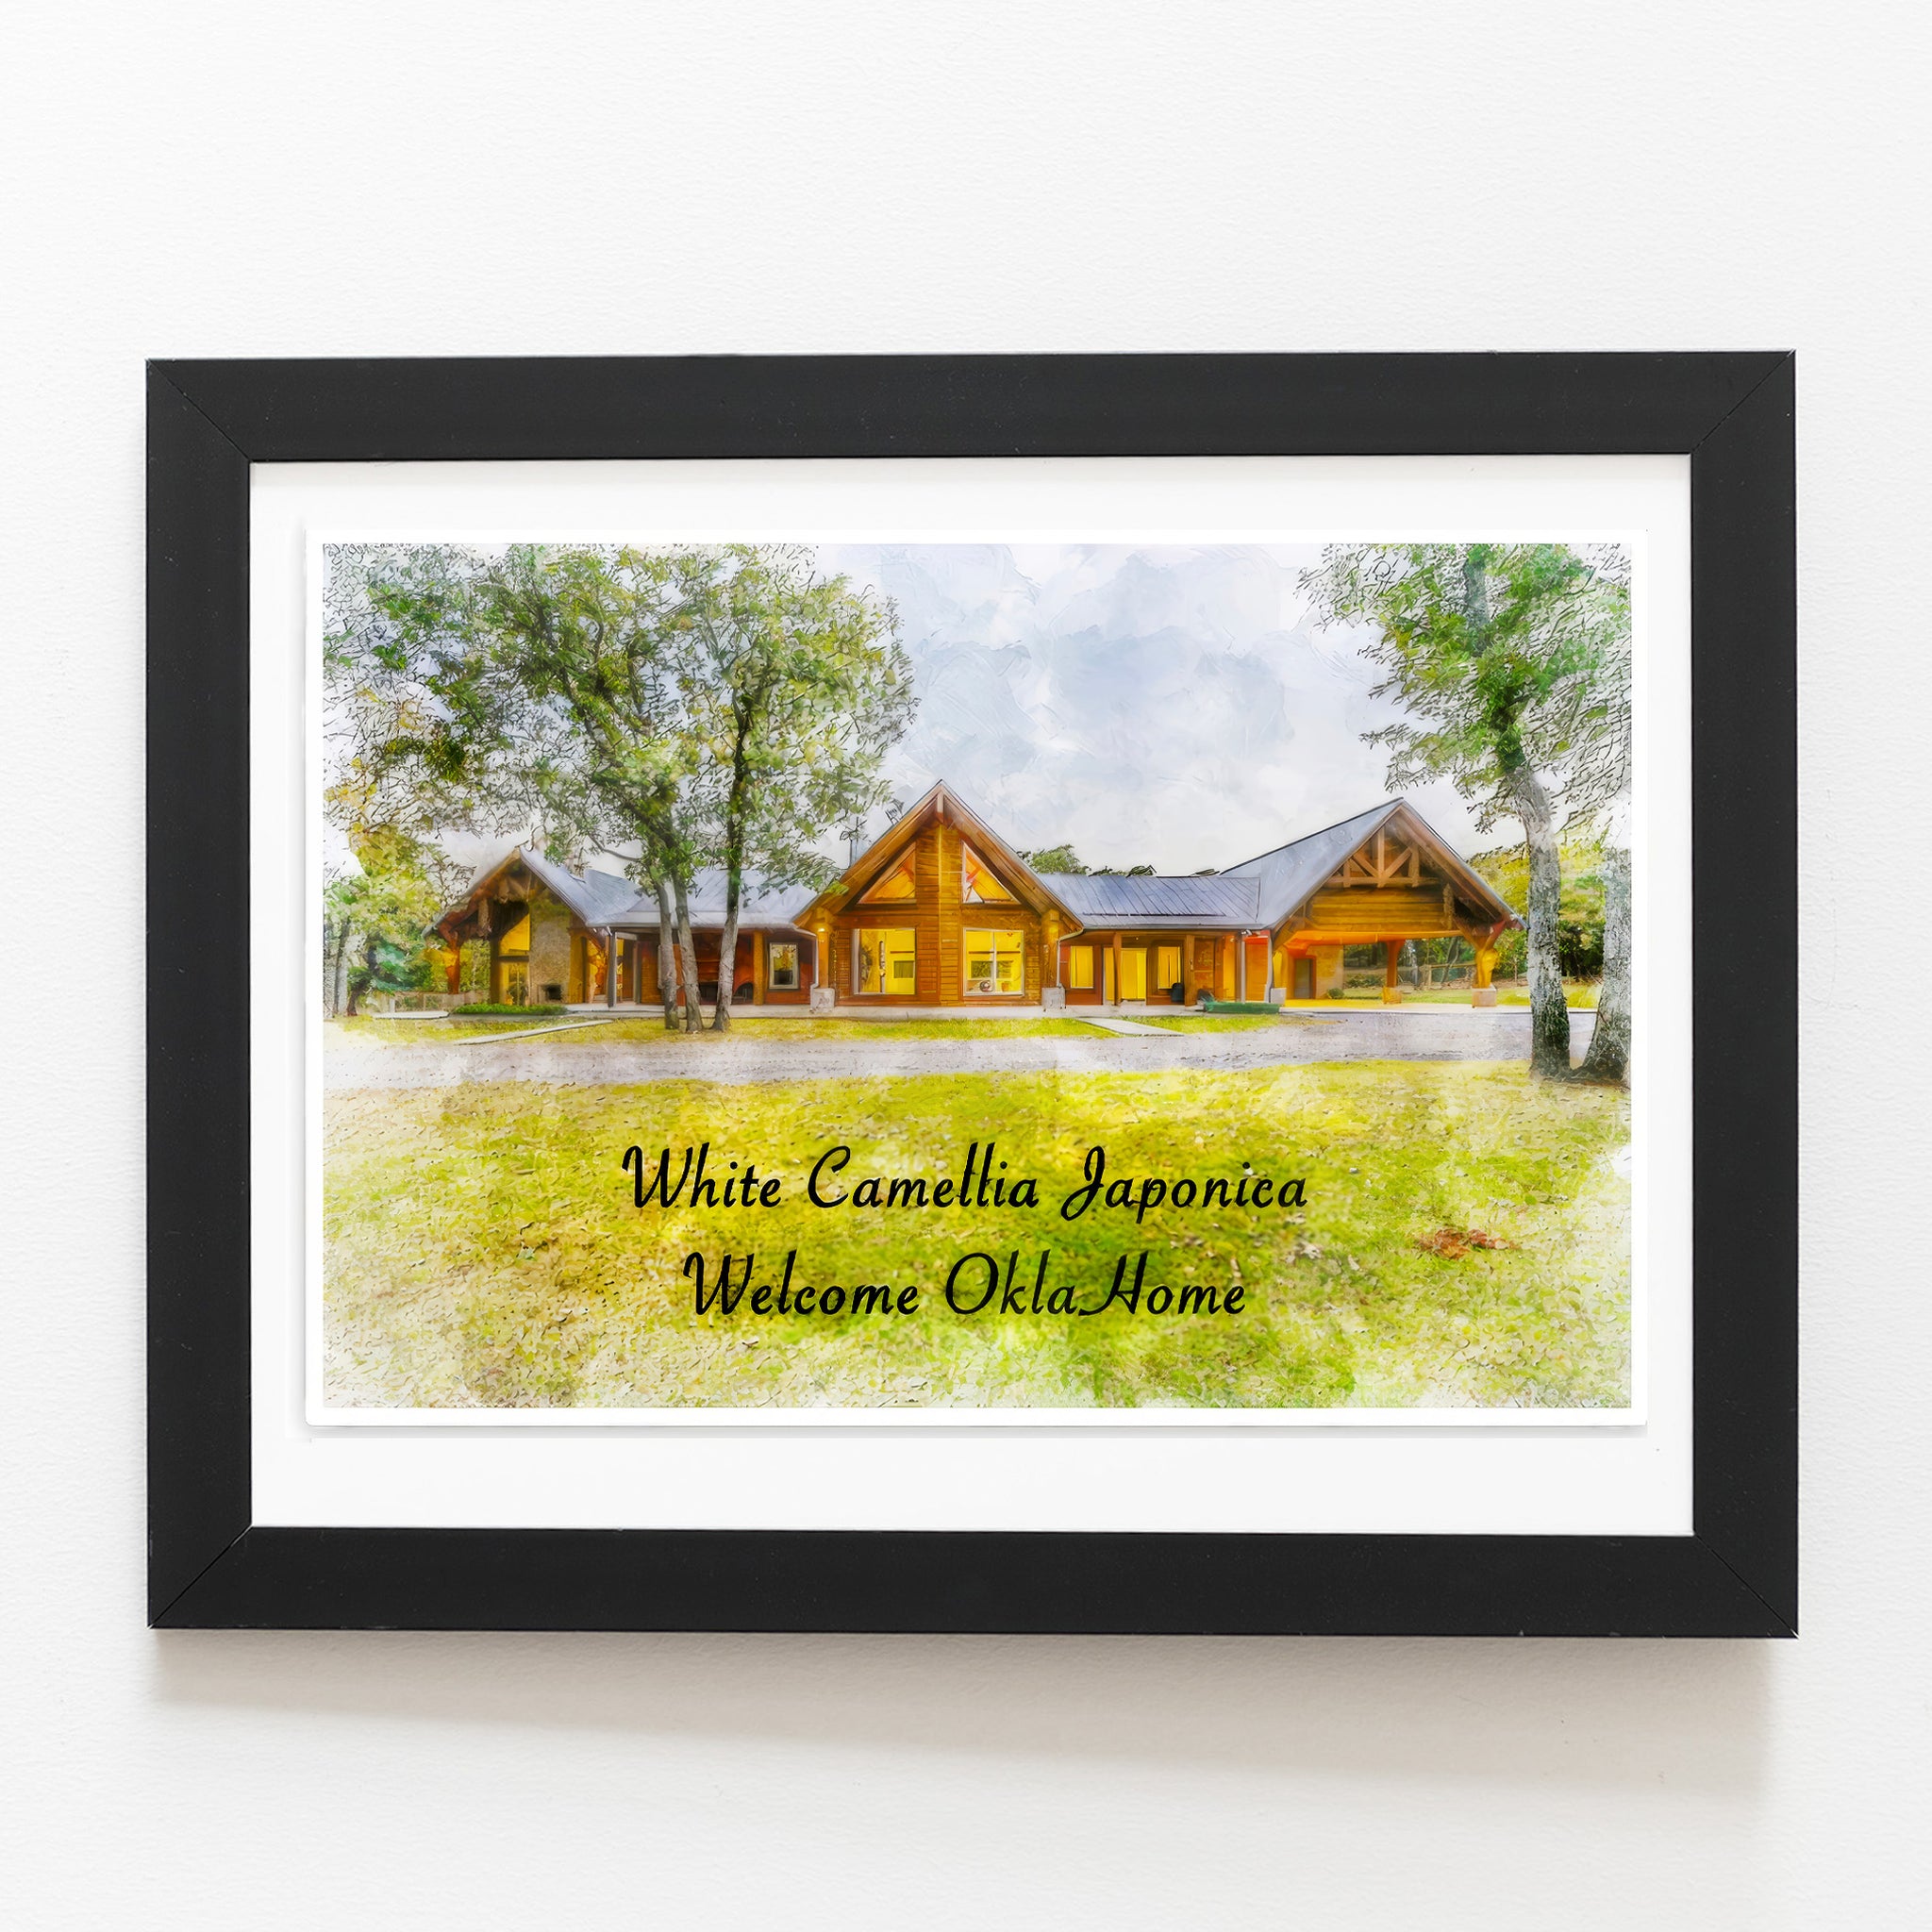 New House Gifts | New Home Gifts | Personalized Home Portrait From Photo | Gifts from Real Estate Agents | Realtor Closing gift Ideas - FromPicToArt